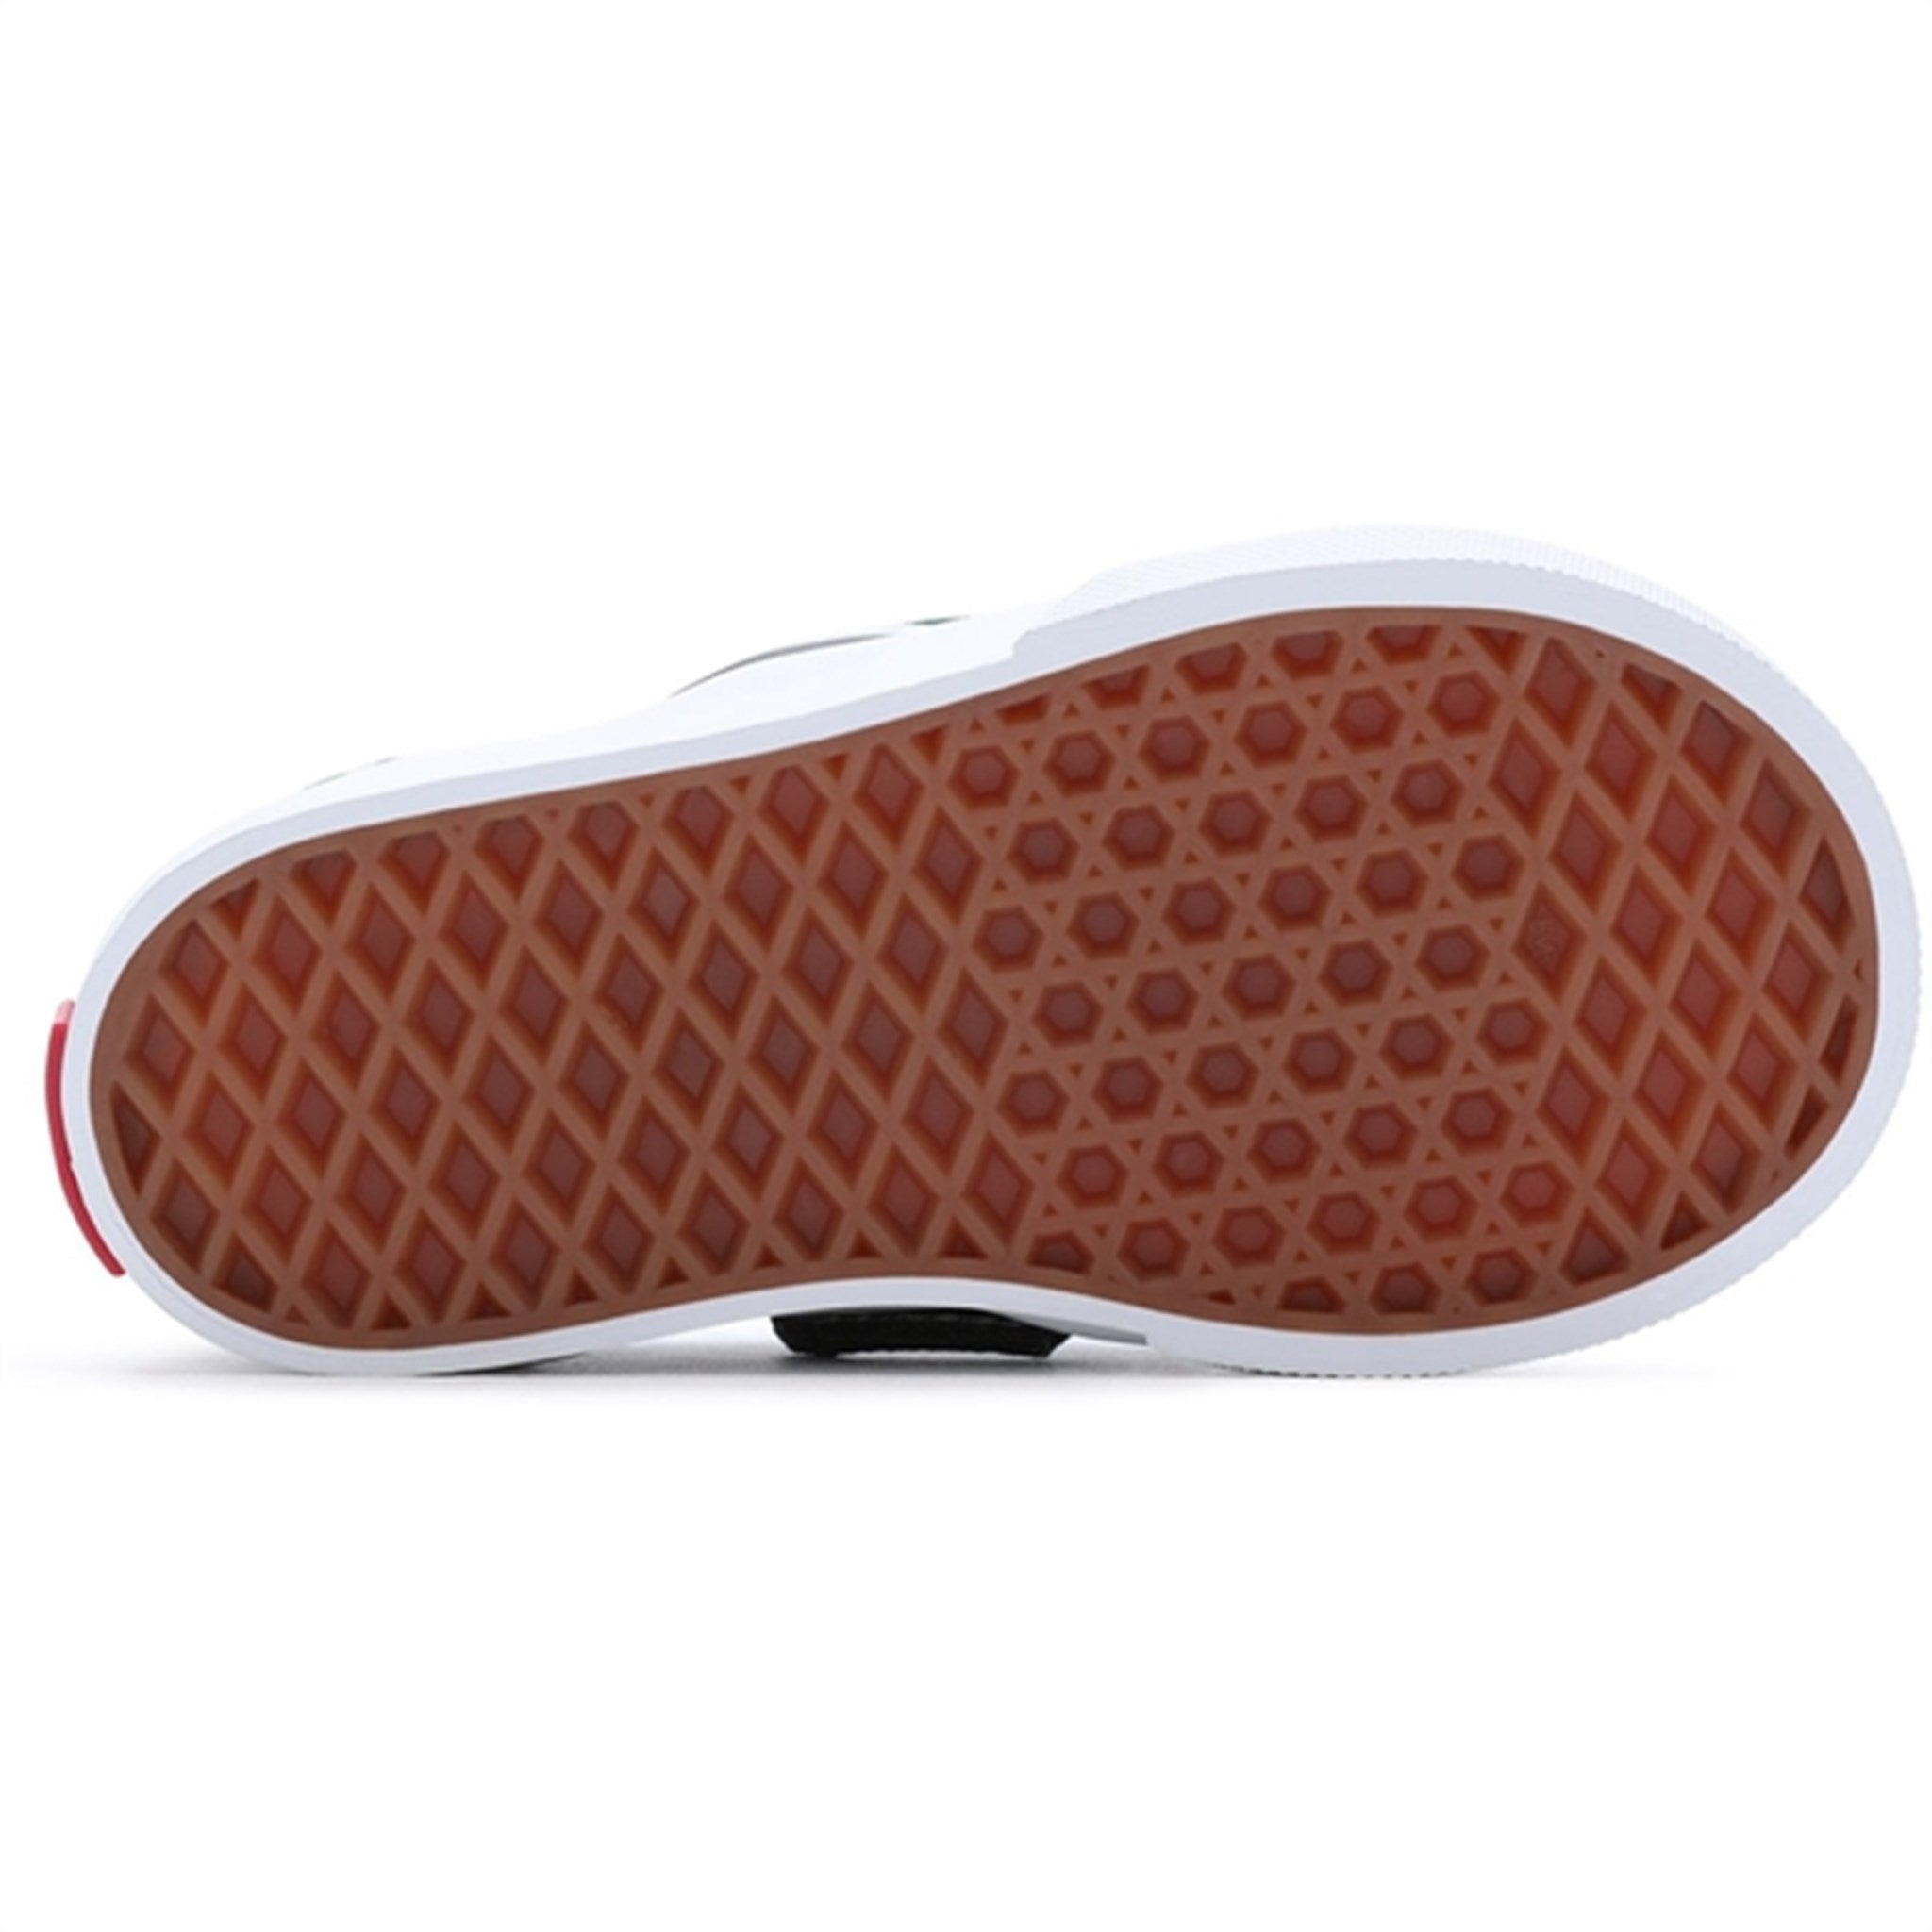 VANS Td Slip-On V Color Theory Checkerboard Mountain View Sko 5